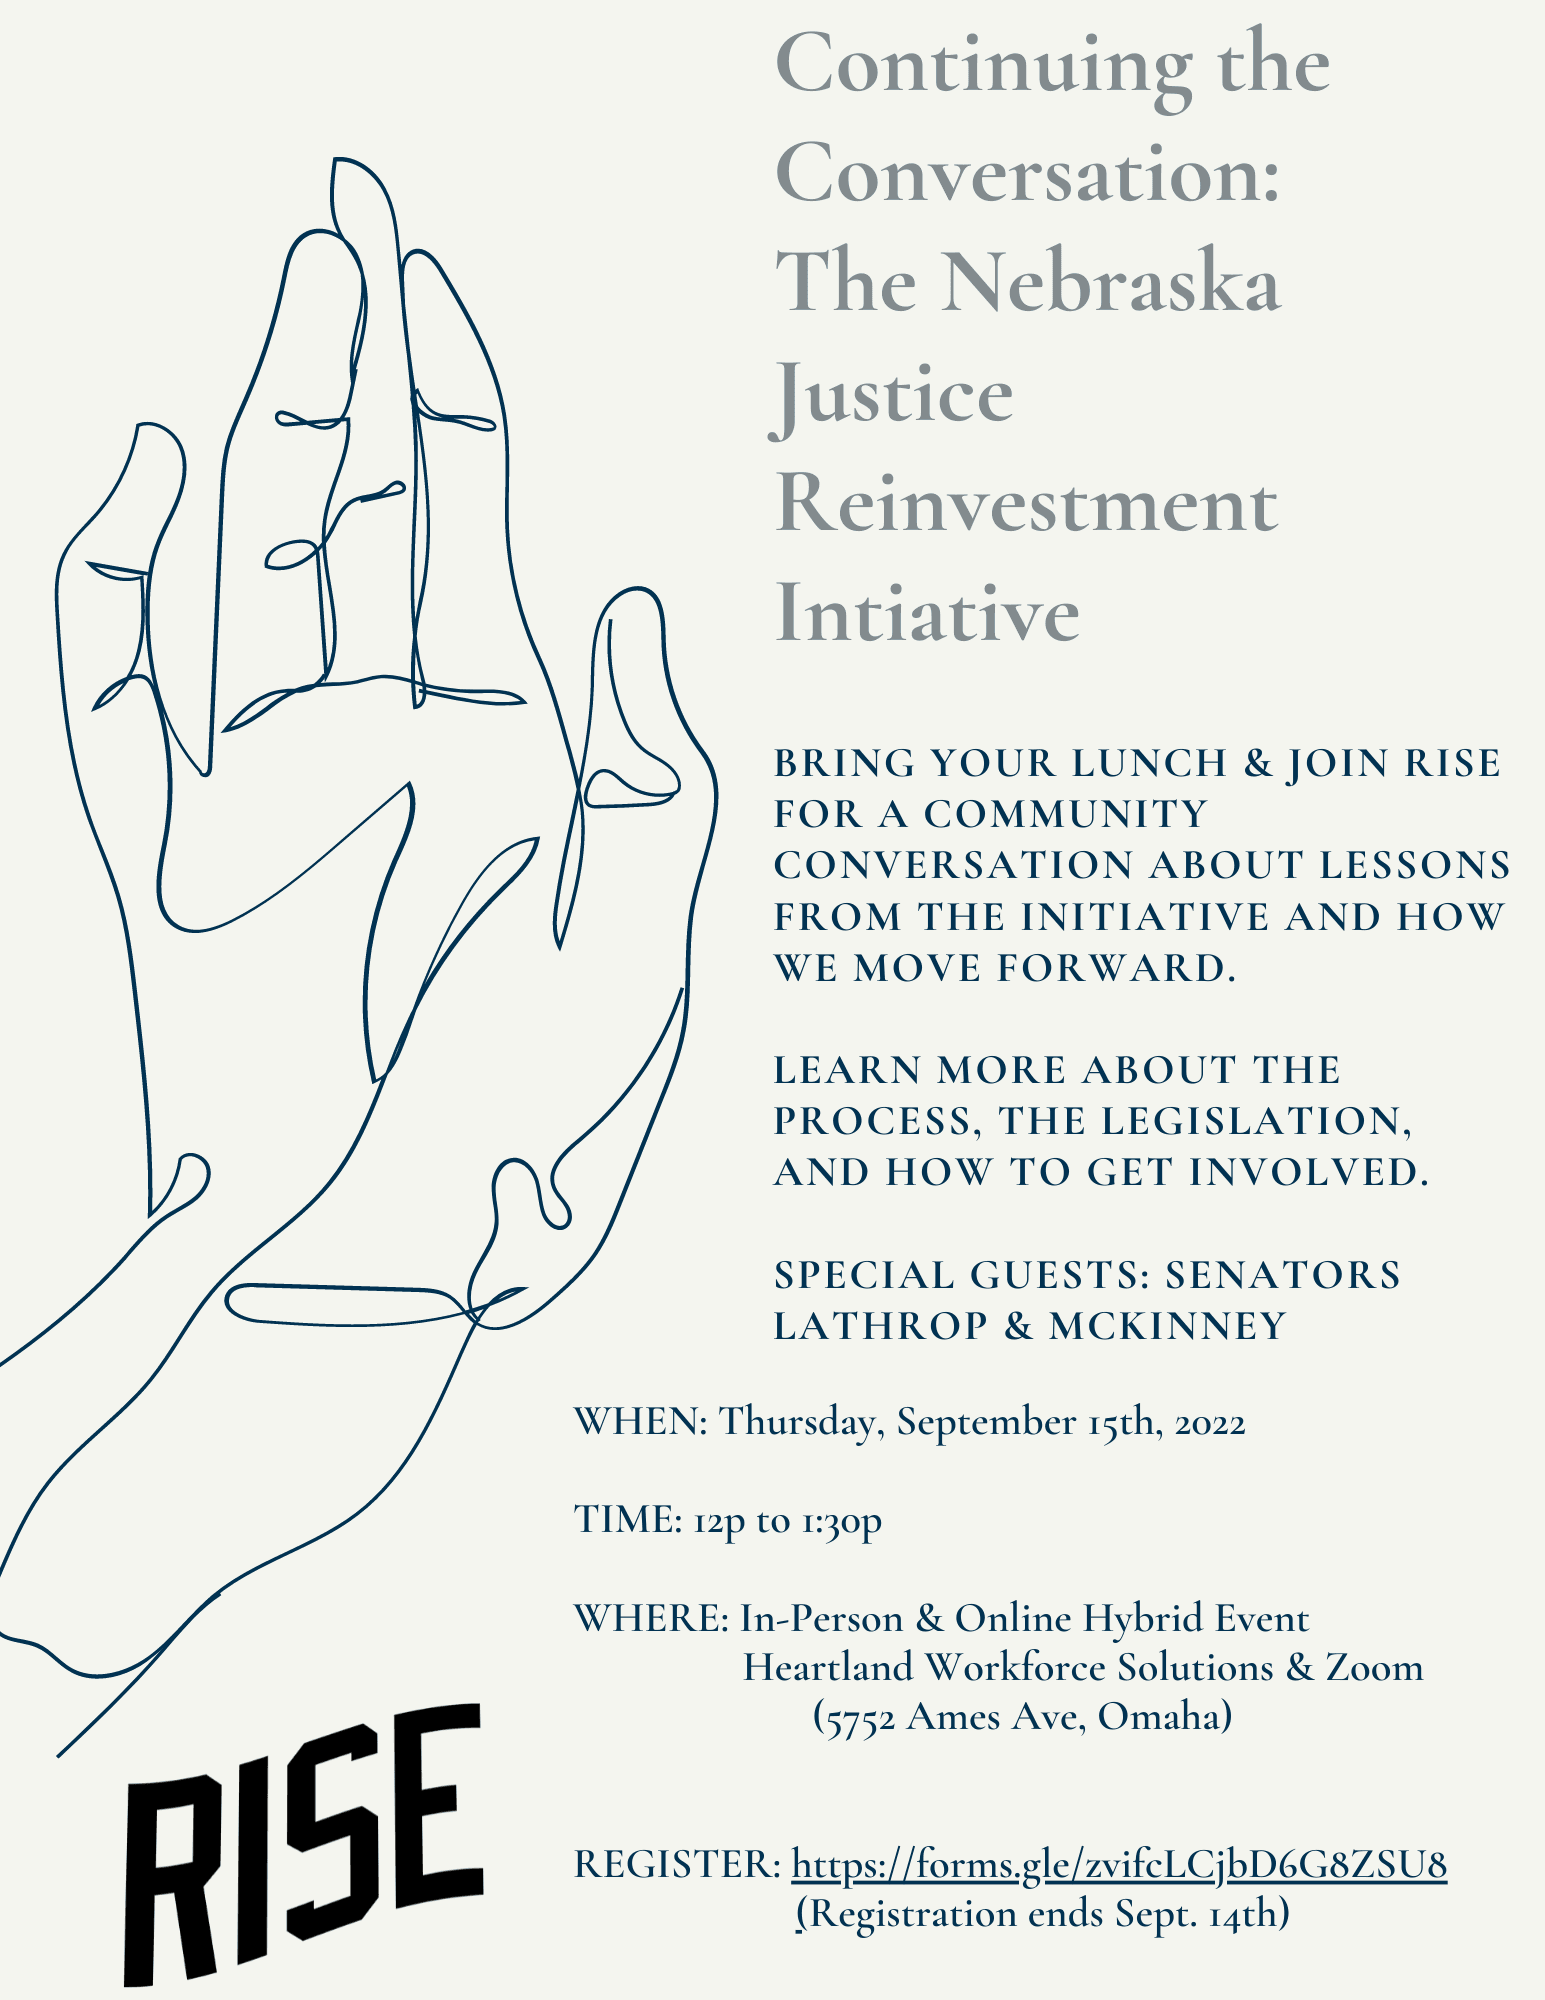 Continuing the Conversation: The Nebraska Justice Reinvestment Initiative